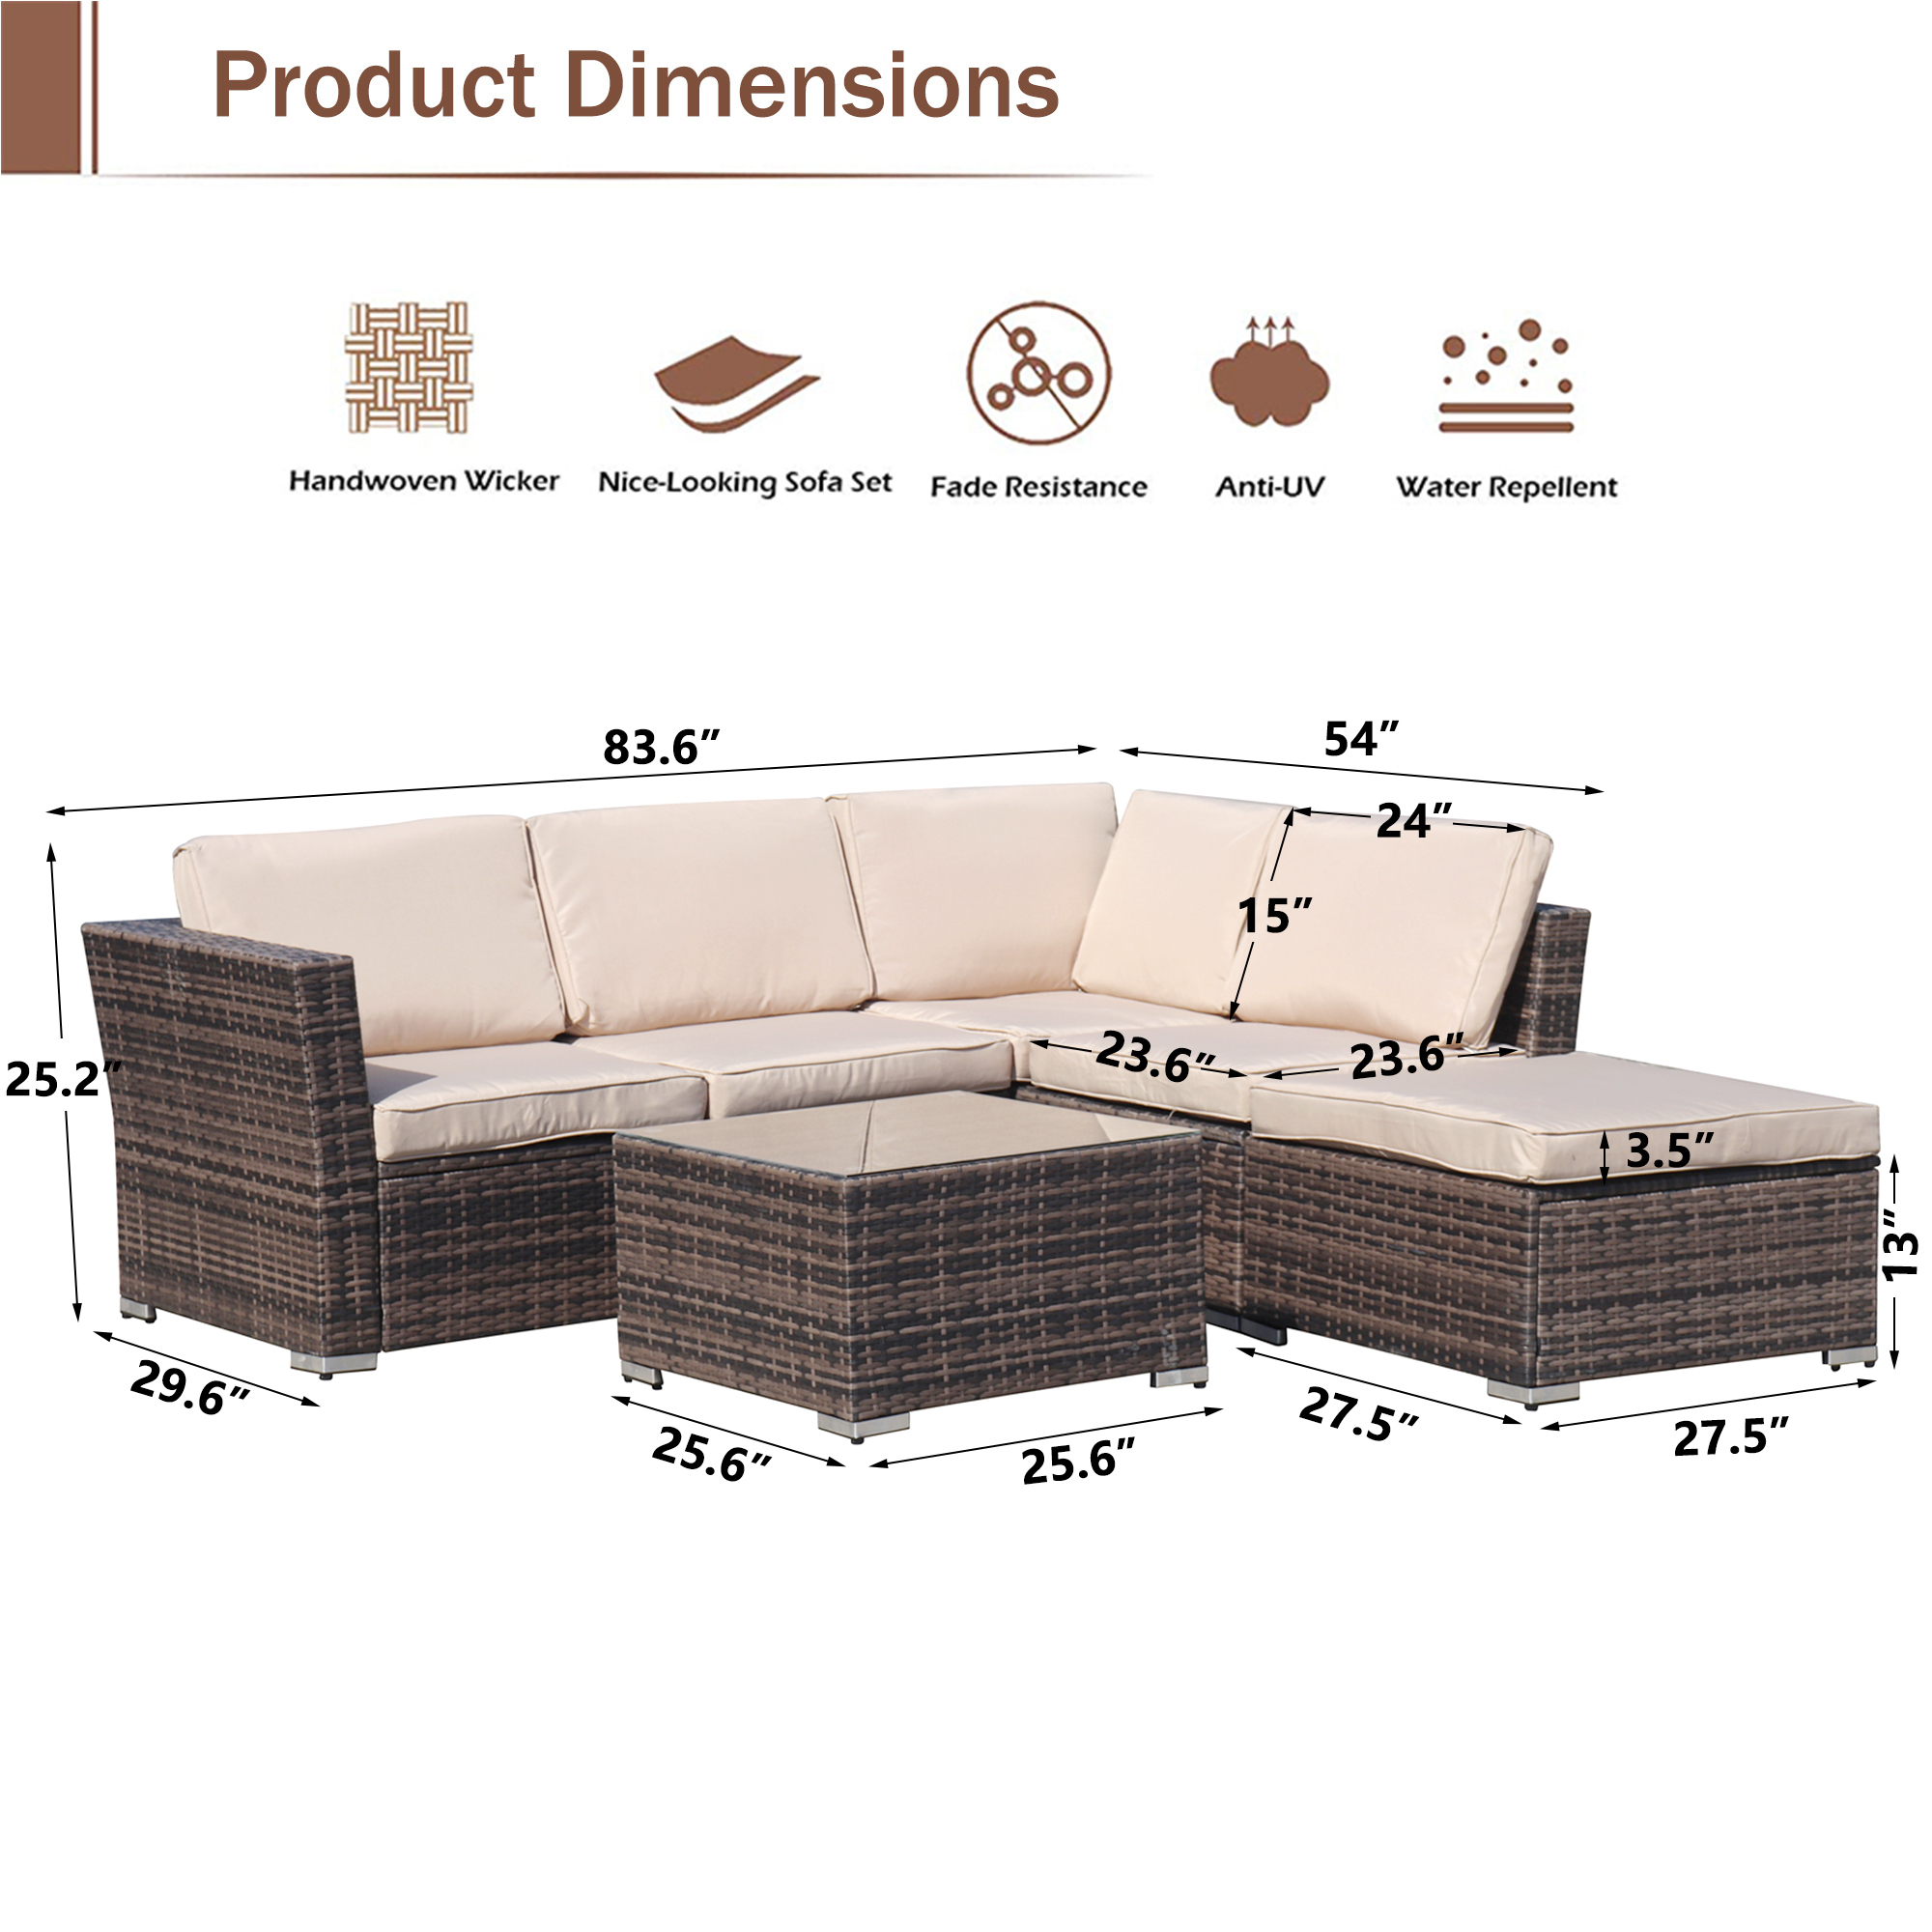 Patio Outdoor Furniture Sets, Patio Couch Sectional Furniture Set for Balcony Porch Backyard Deck Pool,with Chaise Lounge&Coffee Table&Washable Couch Cushions&Upgrade Wicker(4-Piece) (Brown) - image 4 of 9